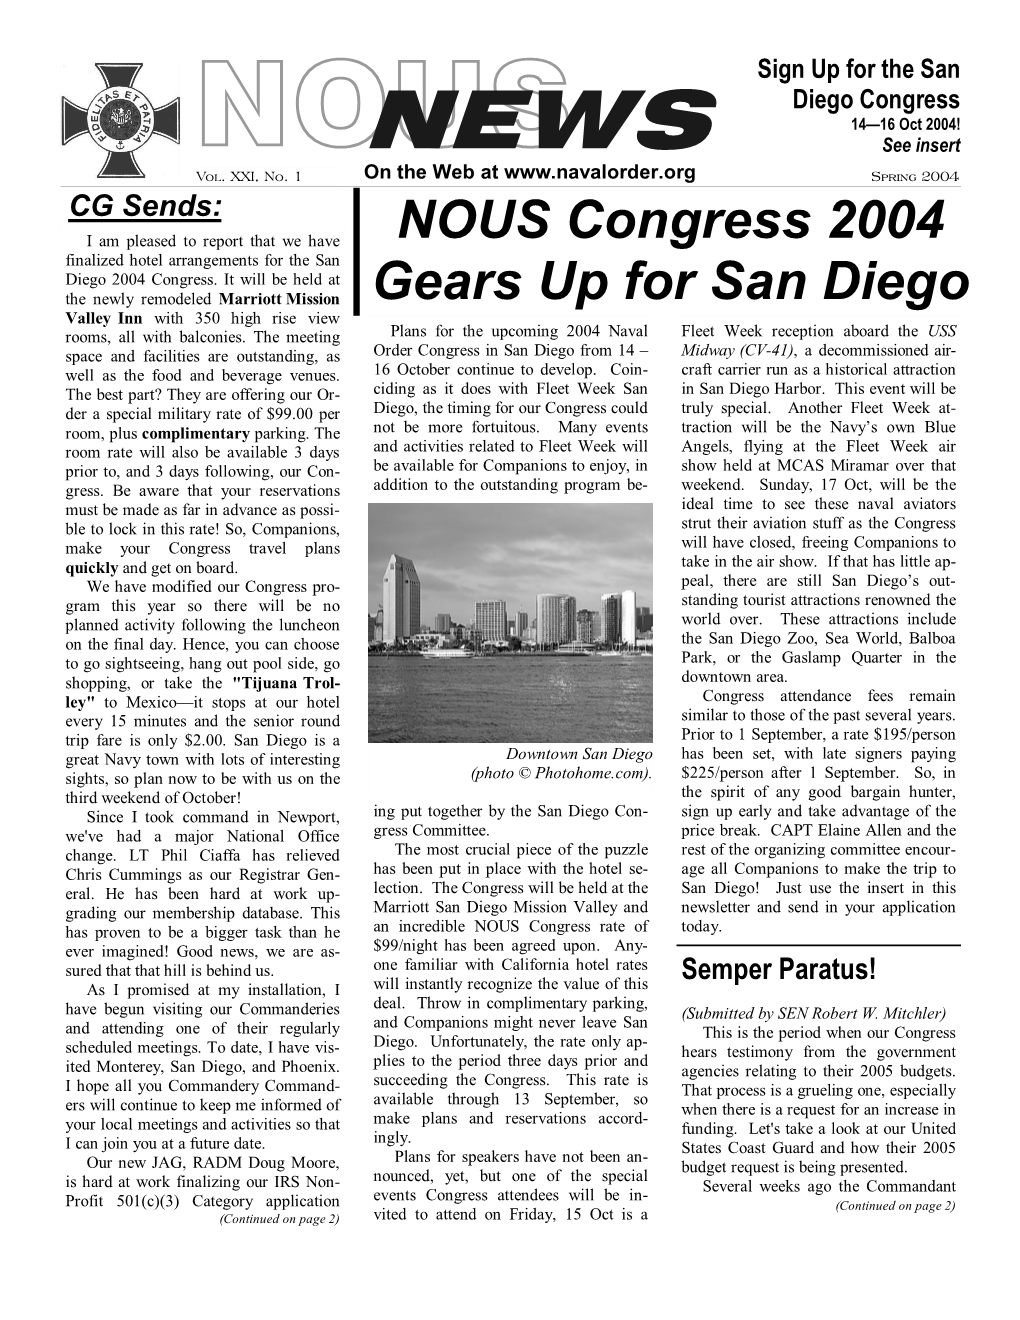 Spring 2004 CG Sends: I Am Pleased to Report That We Have NOUS Congress 2004 Finalized Hotel Arrangements for the San Diego 2004 Congress